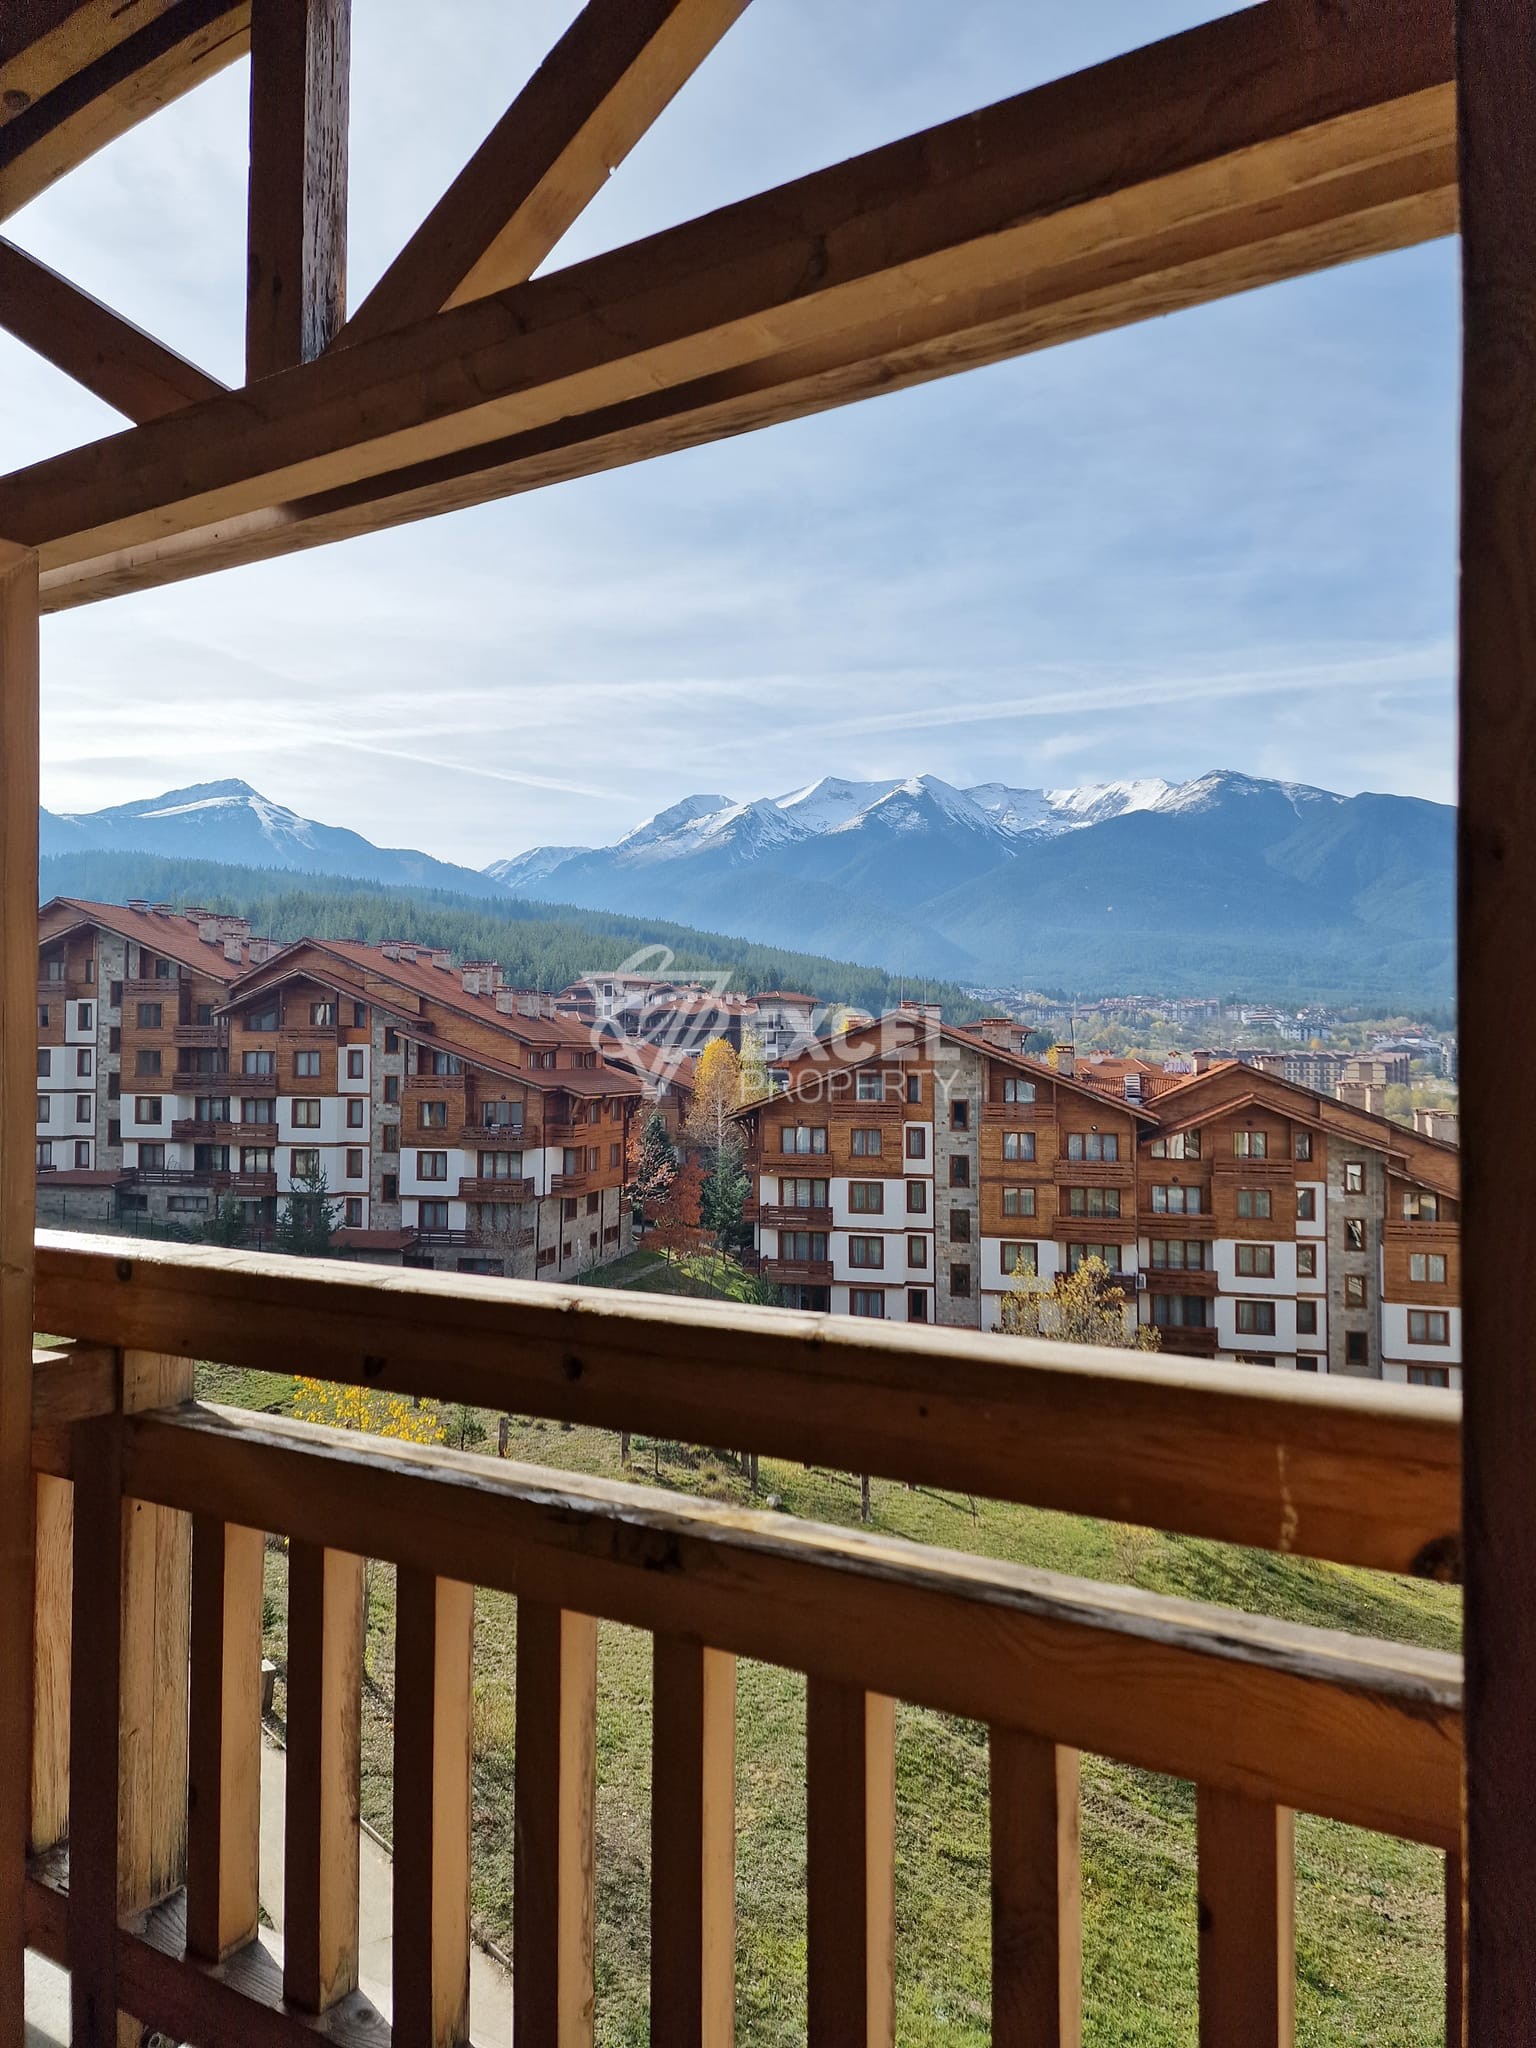 Spacious studio with a terrace and a frontal view of Pirin! Low maintenance fee!